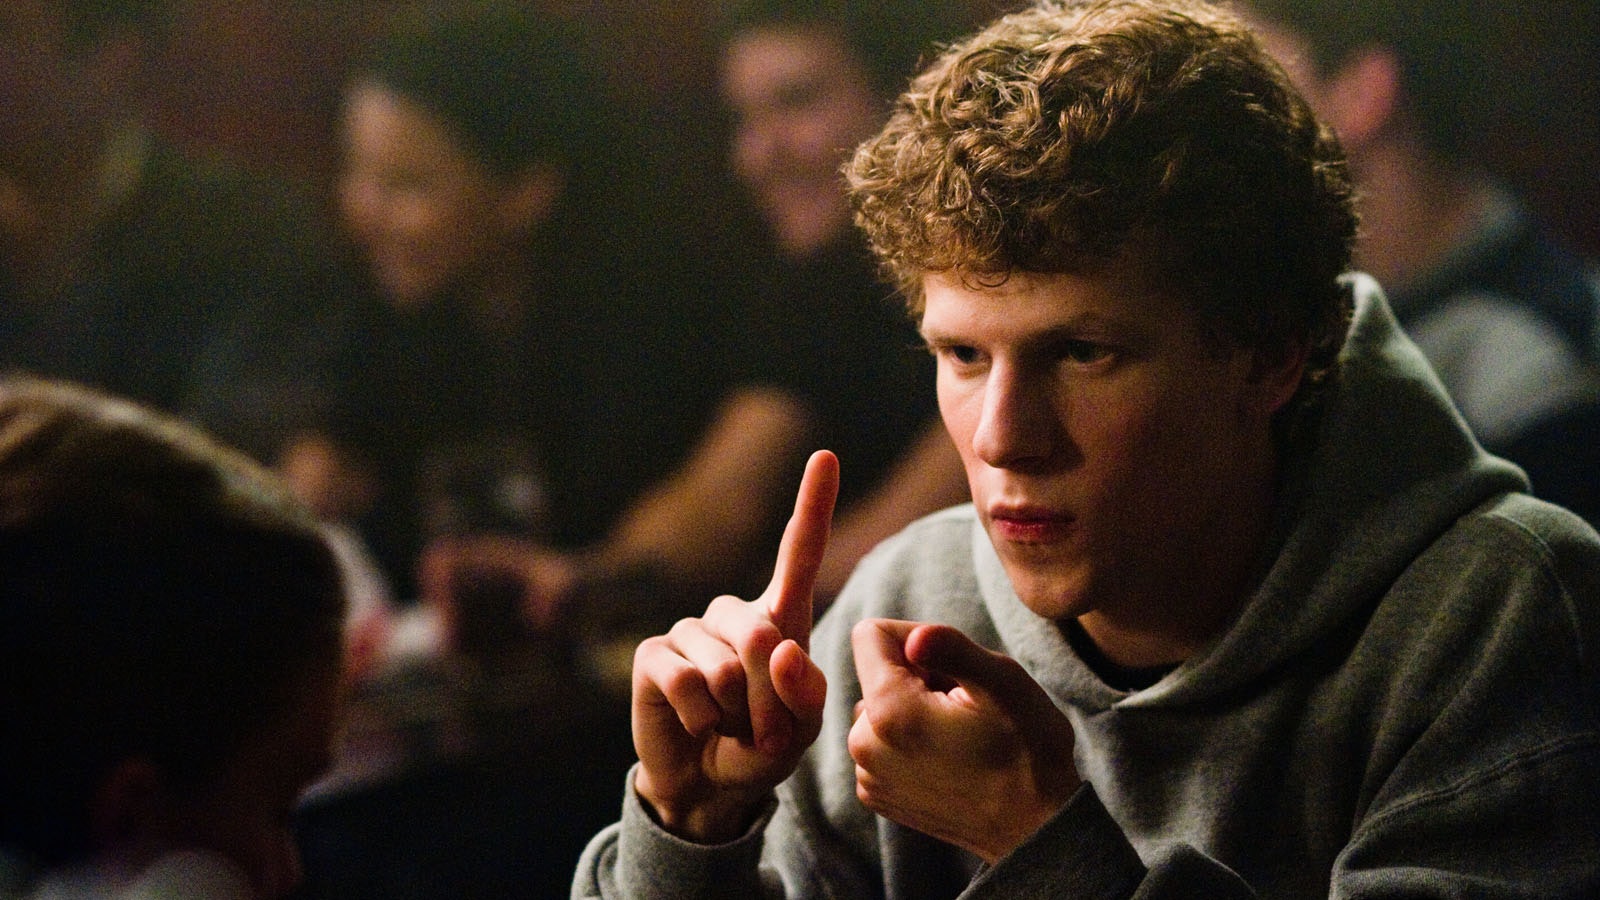 Jesse Eisenberg stars in Columbia Pictures' "The Social Network," also starring Andrew Garfield and Justin Timberlake.